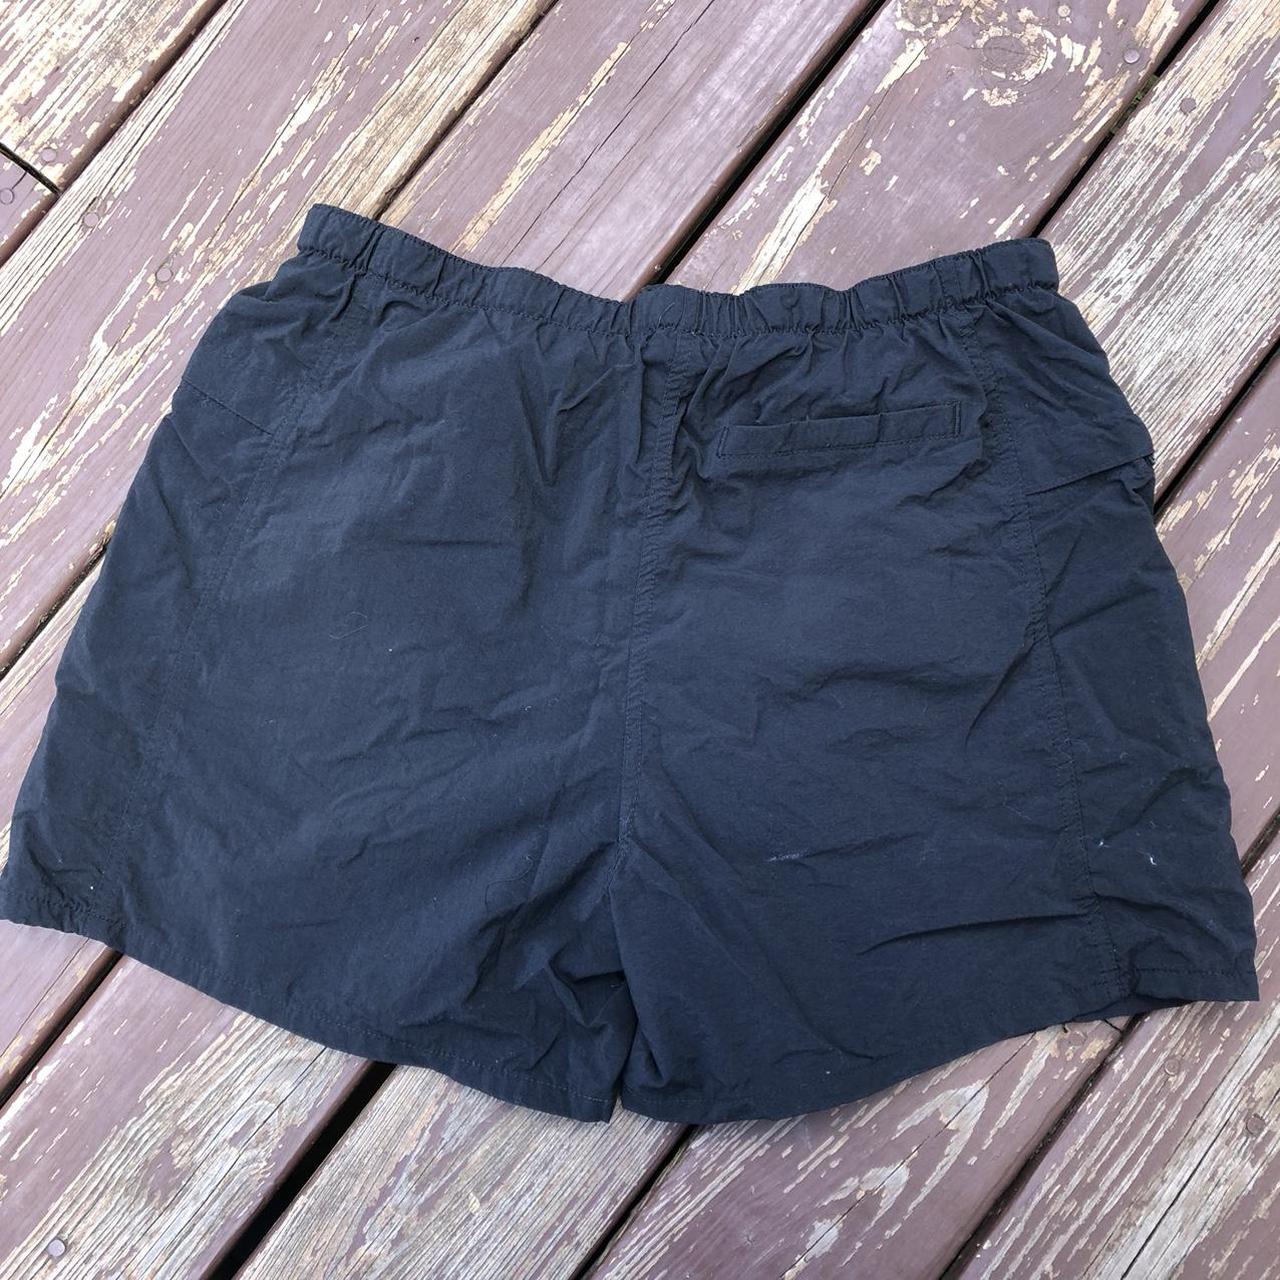 Marlboro swim trunks Black and red PLEASE NOTE there... - Depop